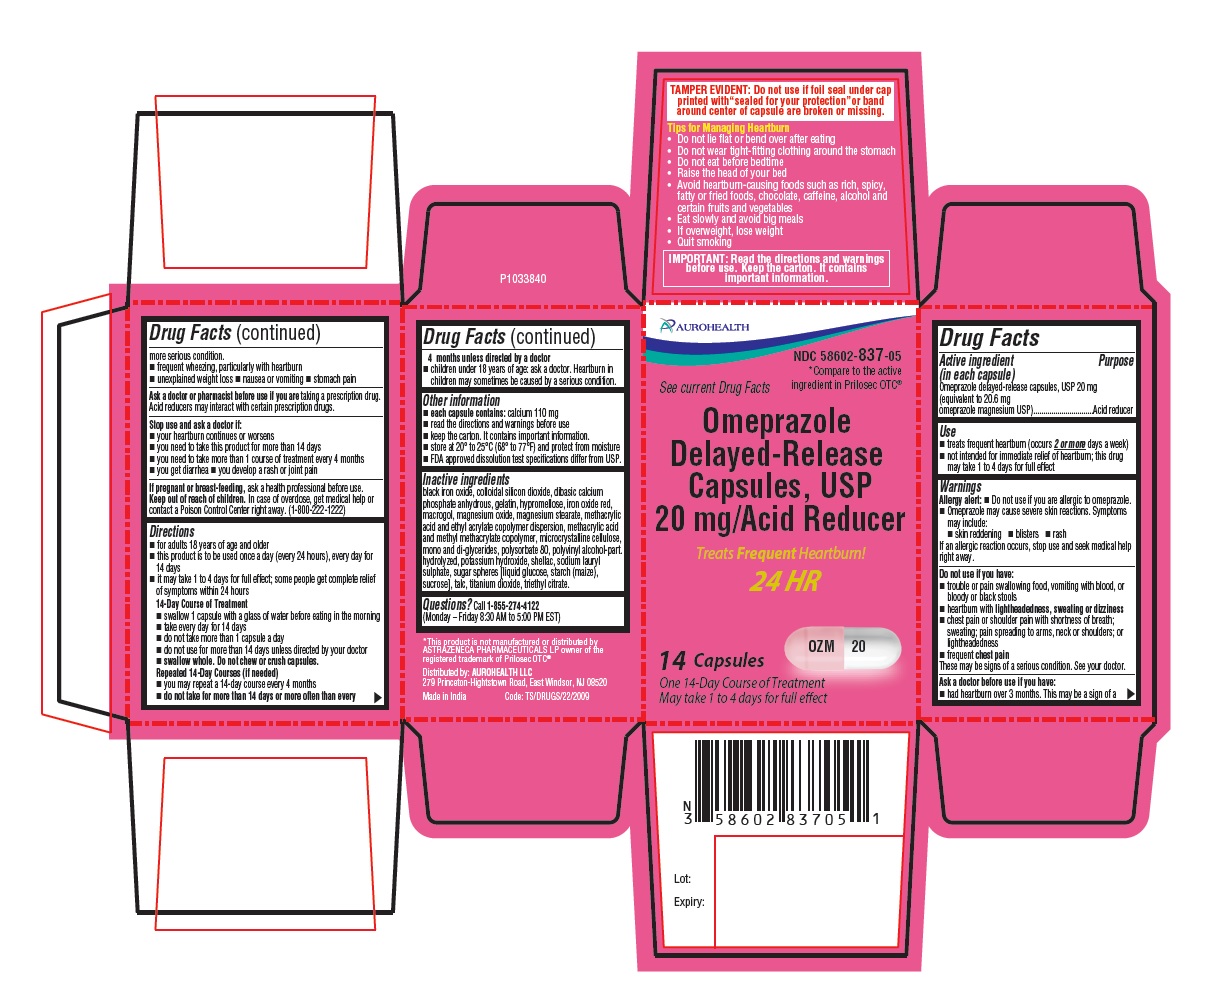 PACKAGE LABEL-PRINCIPAL DISPLAY PANEL - 20 mg Container Carton Label